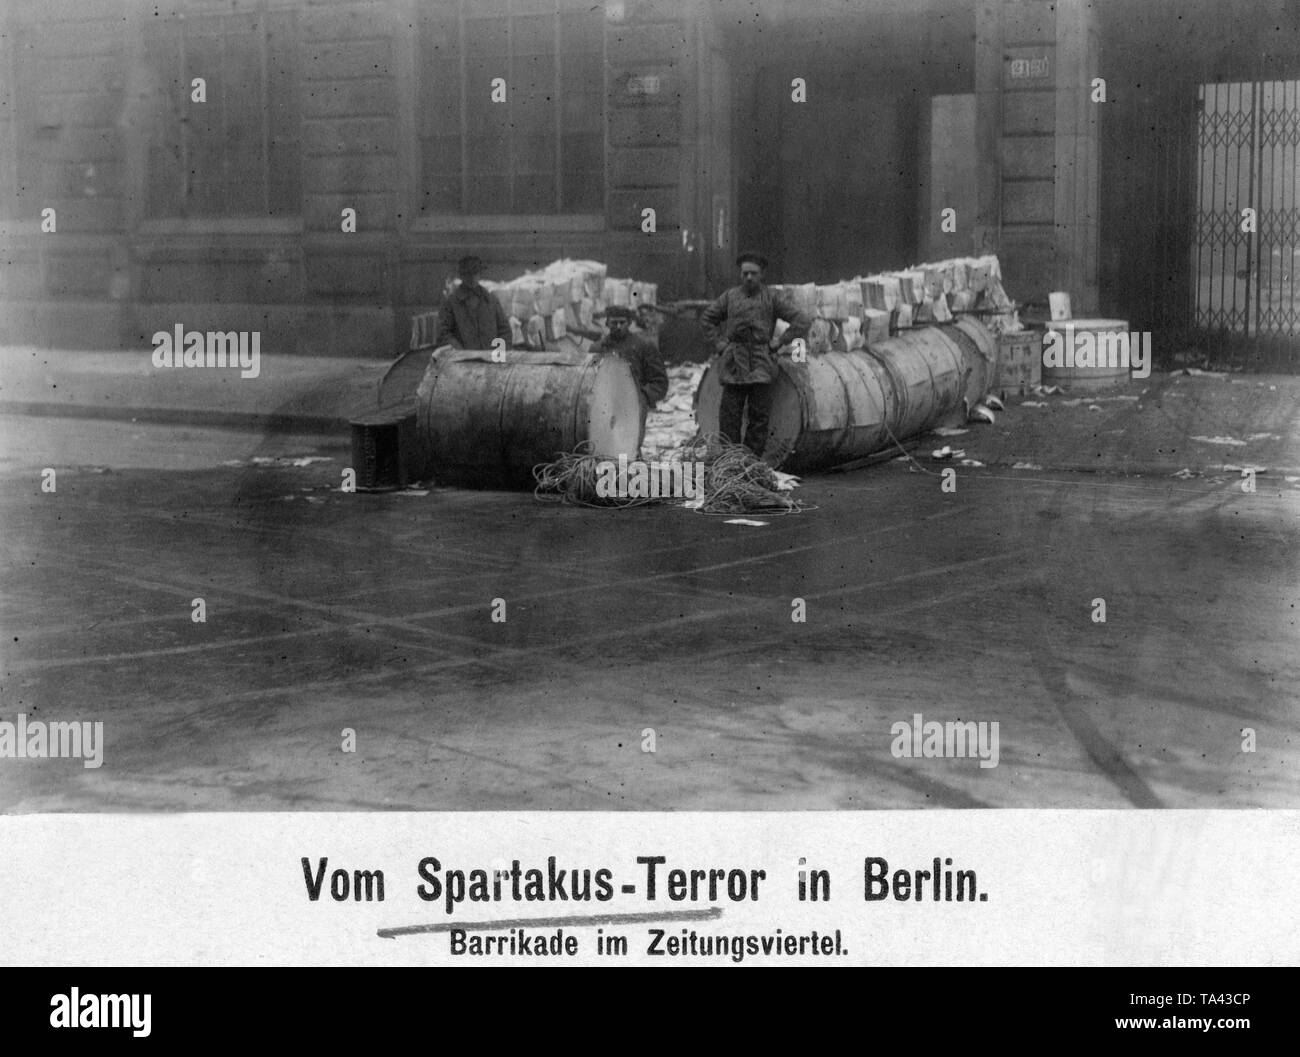 During the January uprising, there were armed conflicts between left-wing revolutionaries and government-loyal Freikorps units in the Berlin Zeitungsviertel (newspaper quarter). Here is a barricade reconquered by the government troops in front of the 'Mossehaus' in the Schuetzenstrasse. Stock Photo